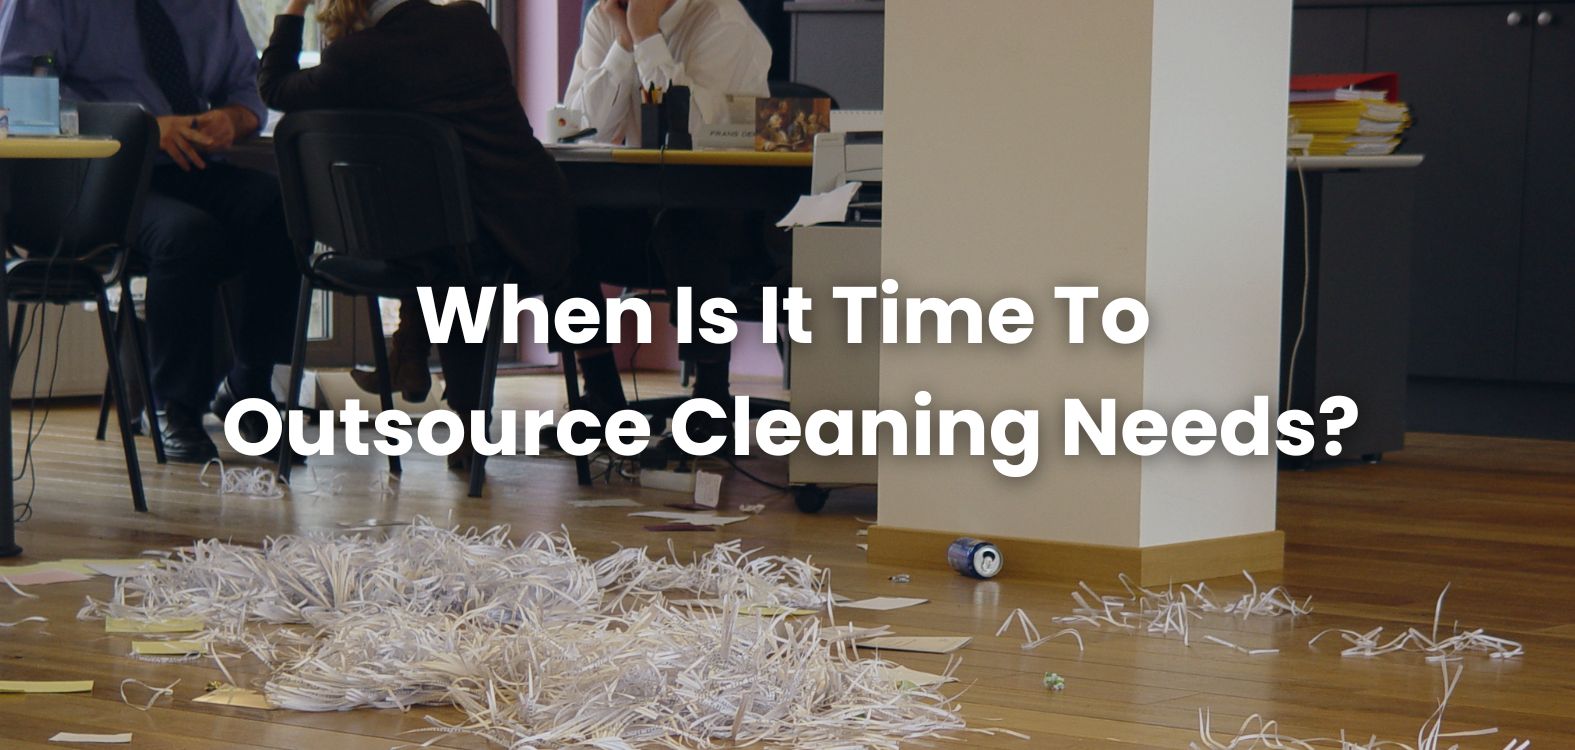 Outsource cleaning